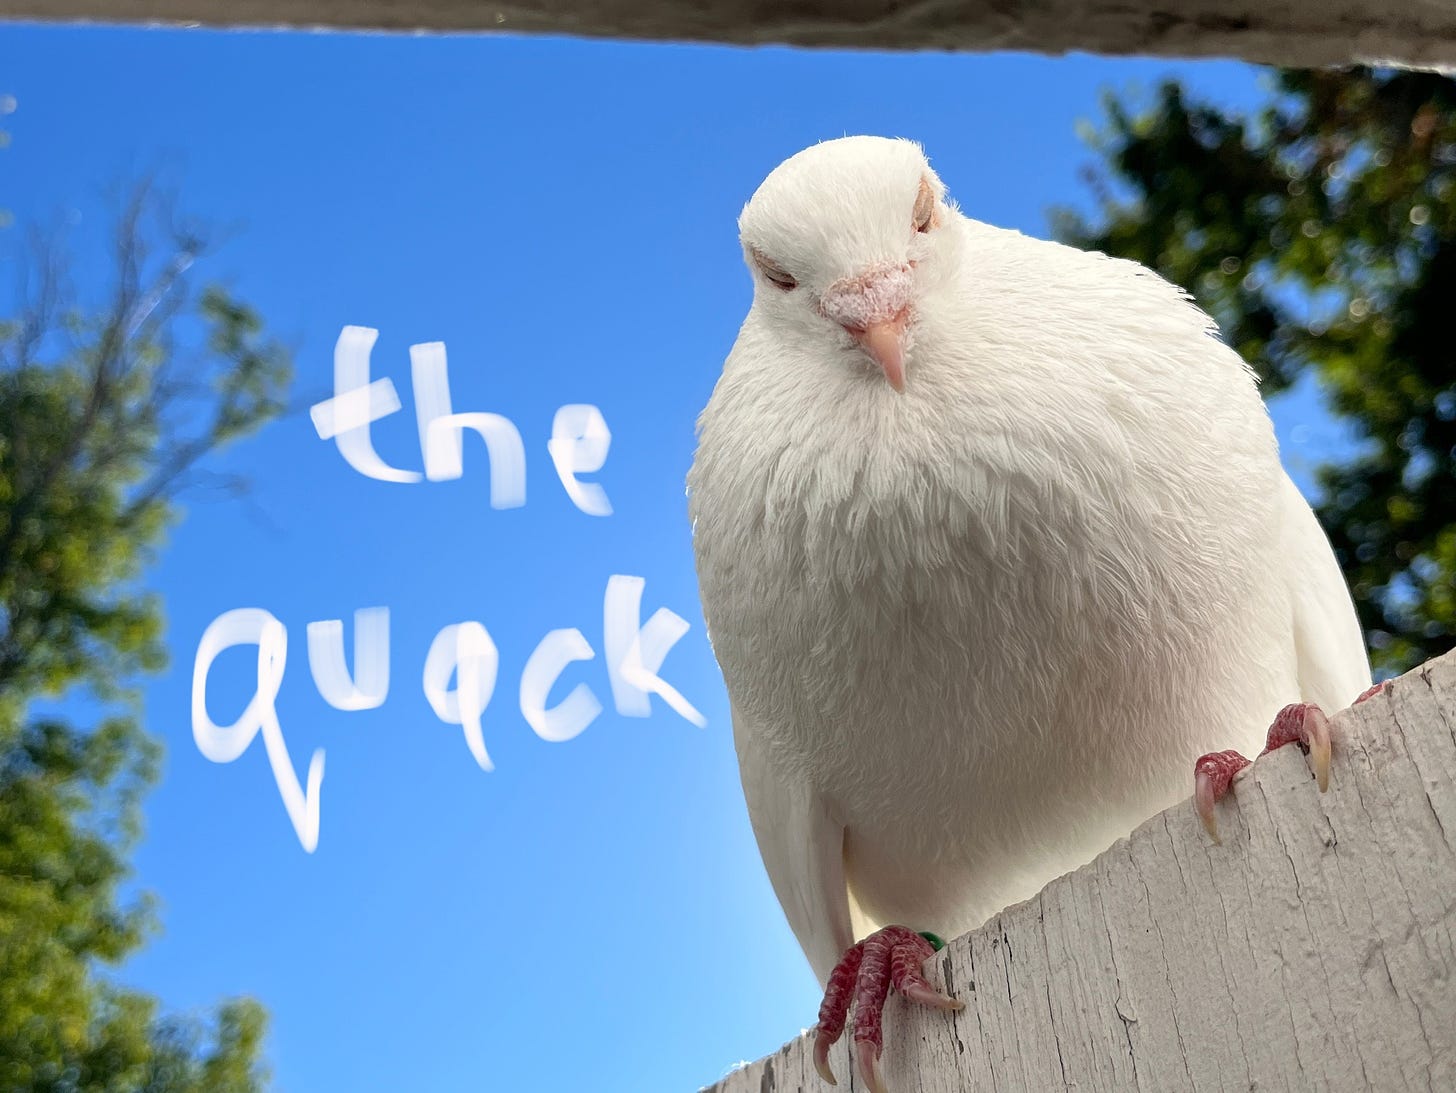 A white pigeon glares down from a perch, the words "the quack" are written in whispy letters against the blue sky